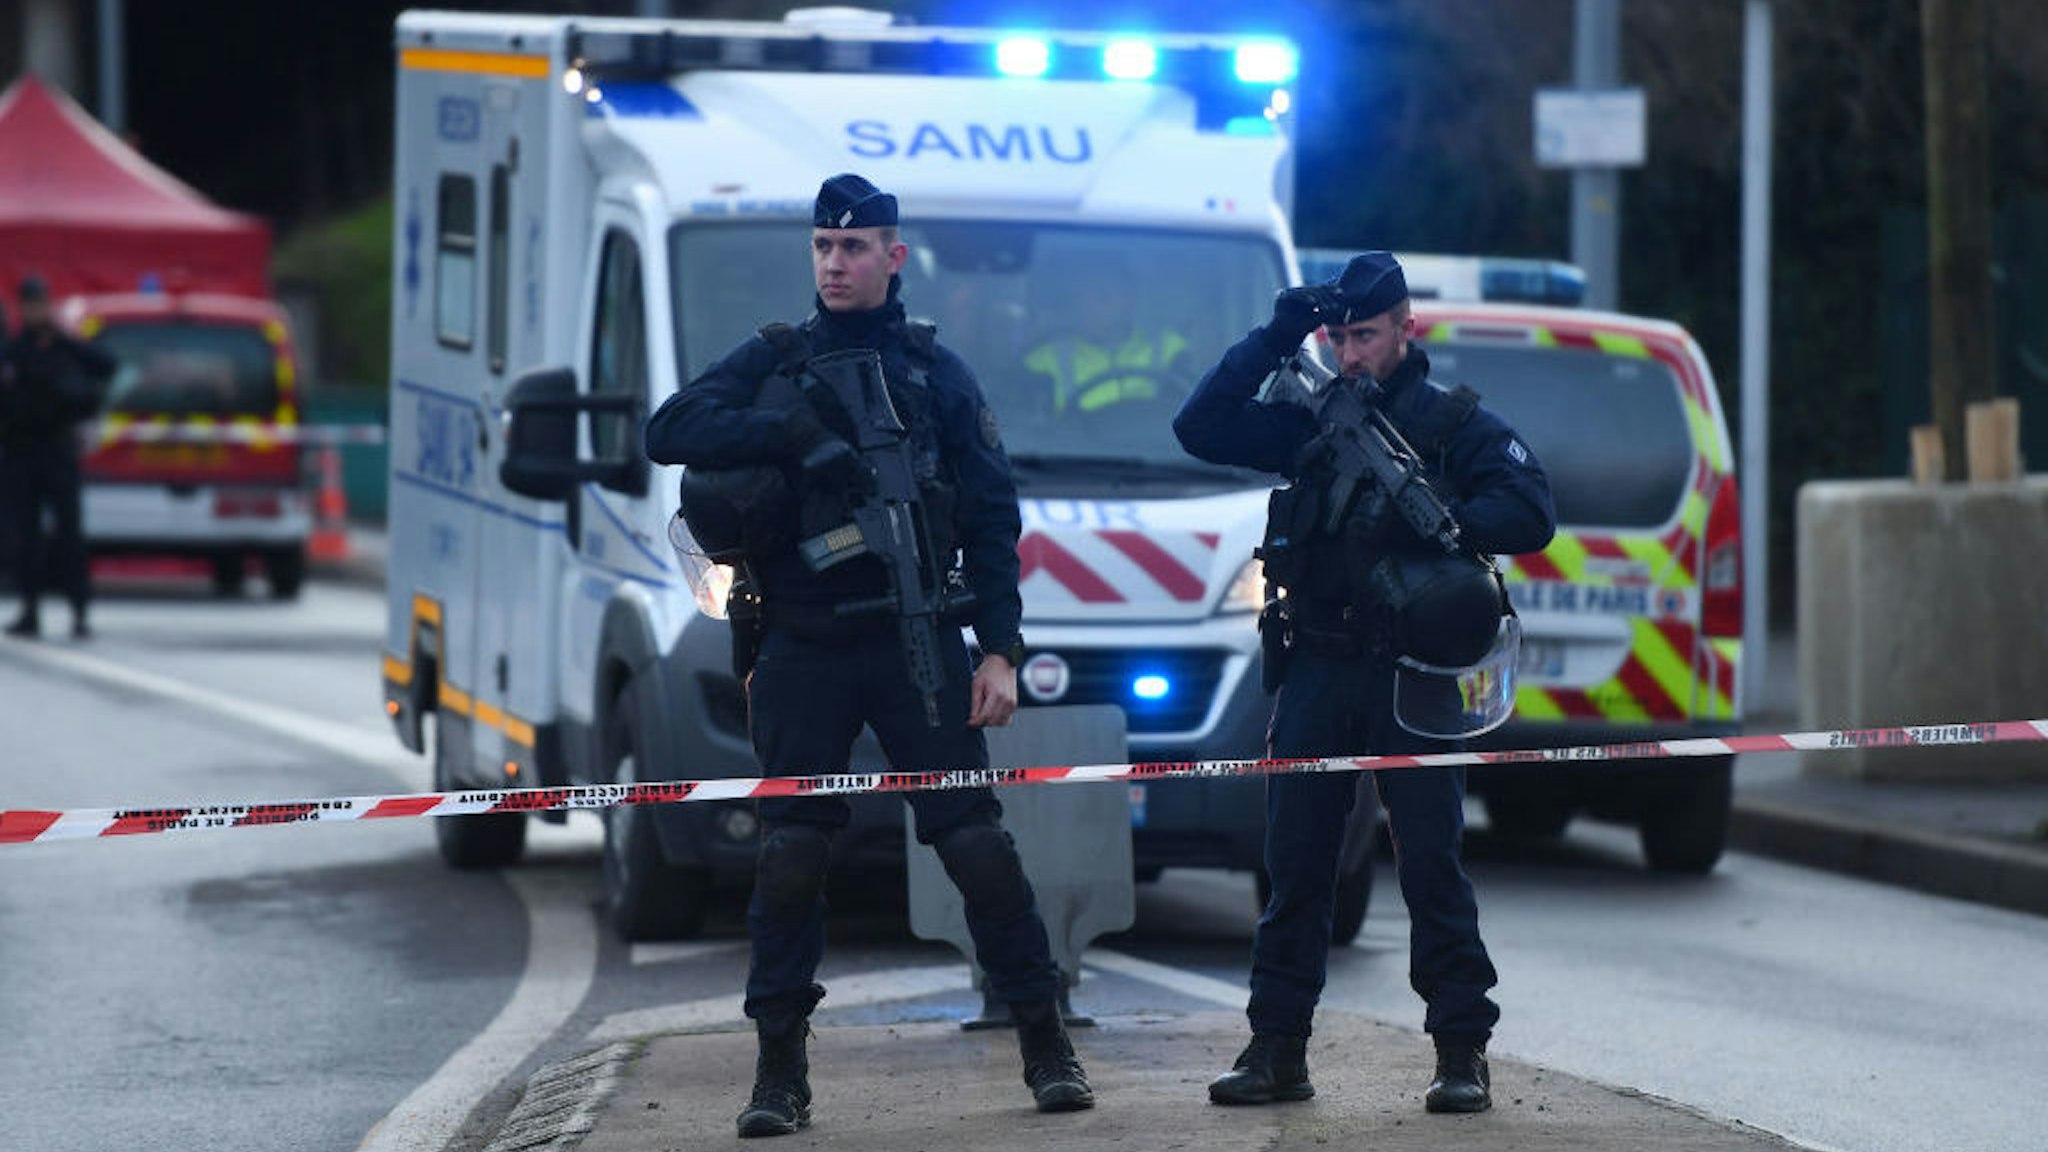 Police officers stand guard on January 3, 2020 in L'Hay-les-Roses on the site where police shot dead a knife-wielding man who killed one person and injured at least two others in a nearby park of the south of Paris' suburban city of Villejuif. - The man had attacked "several people" in a park in Villejuif before he was "neutralised", the Paris police department said. Sources close to the investigation told AFP one of the victims had later died. The attacker was shot dead by police in a neighbouring suburb. The attacker's motive has not been made clear. (Photo by CHRISTOPHE ARCHAMBAULT / AFP) (Photo by CHRISTOPHE ARCHAMBAULT/AFP via Getty Images)